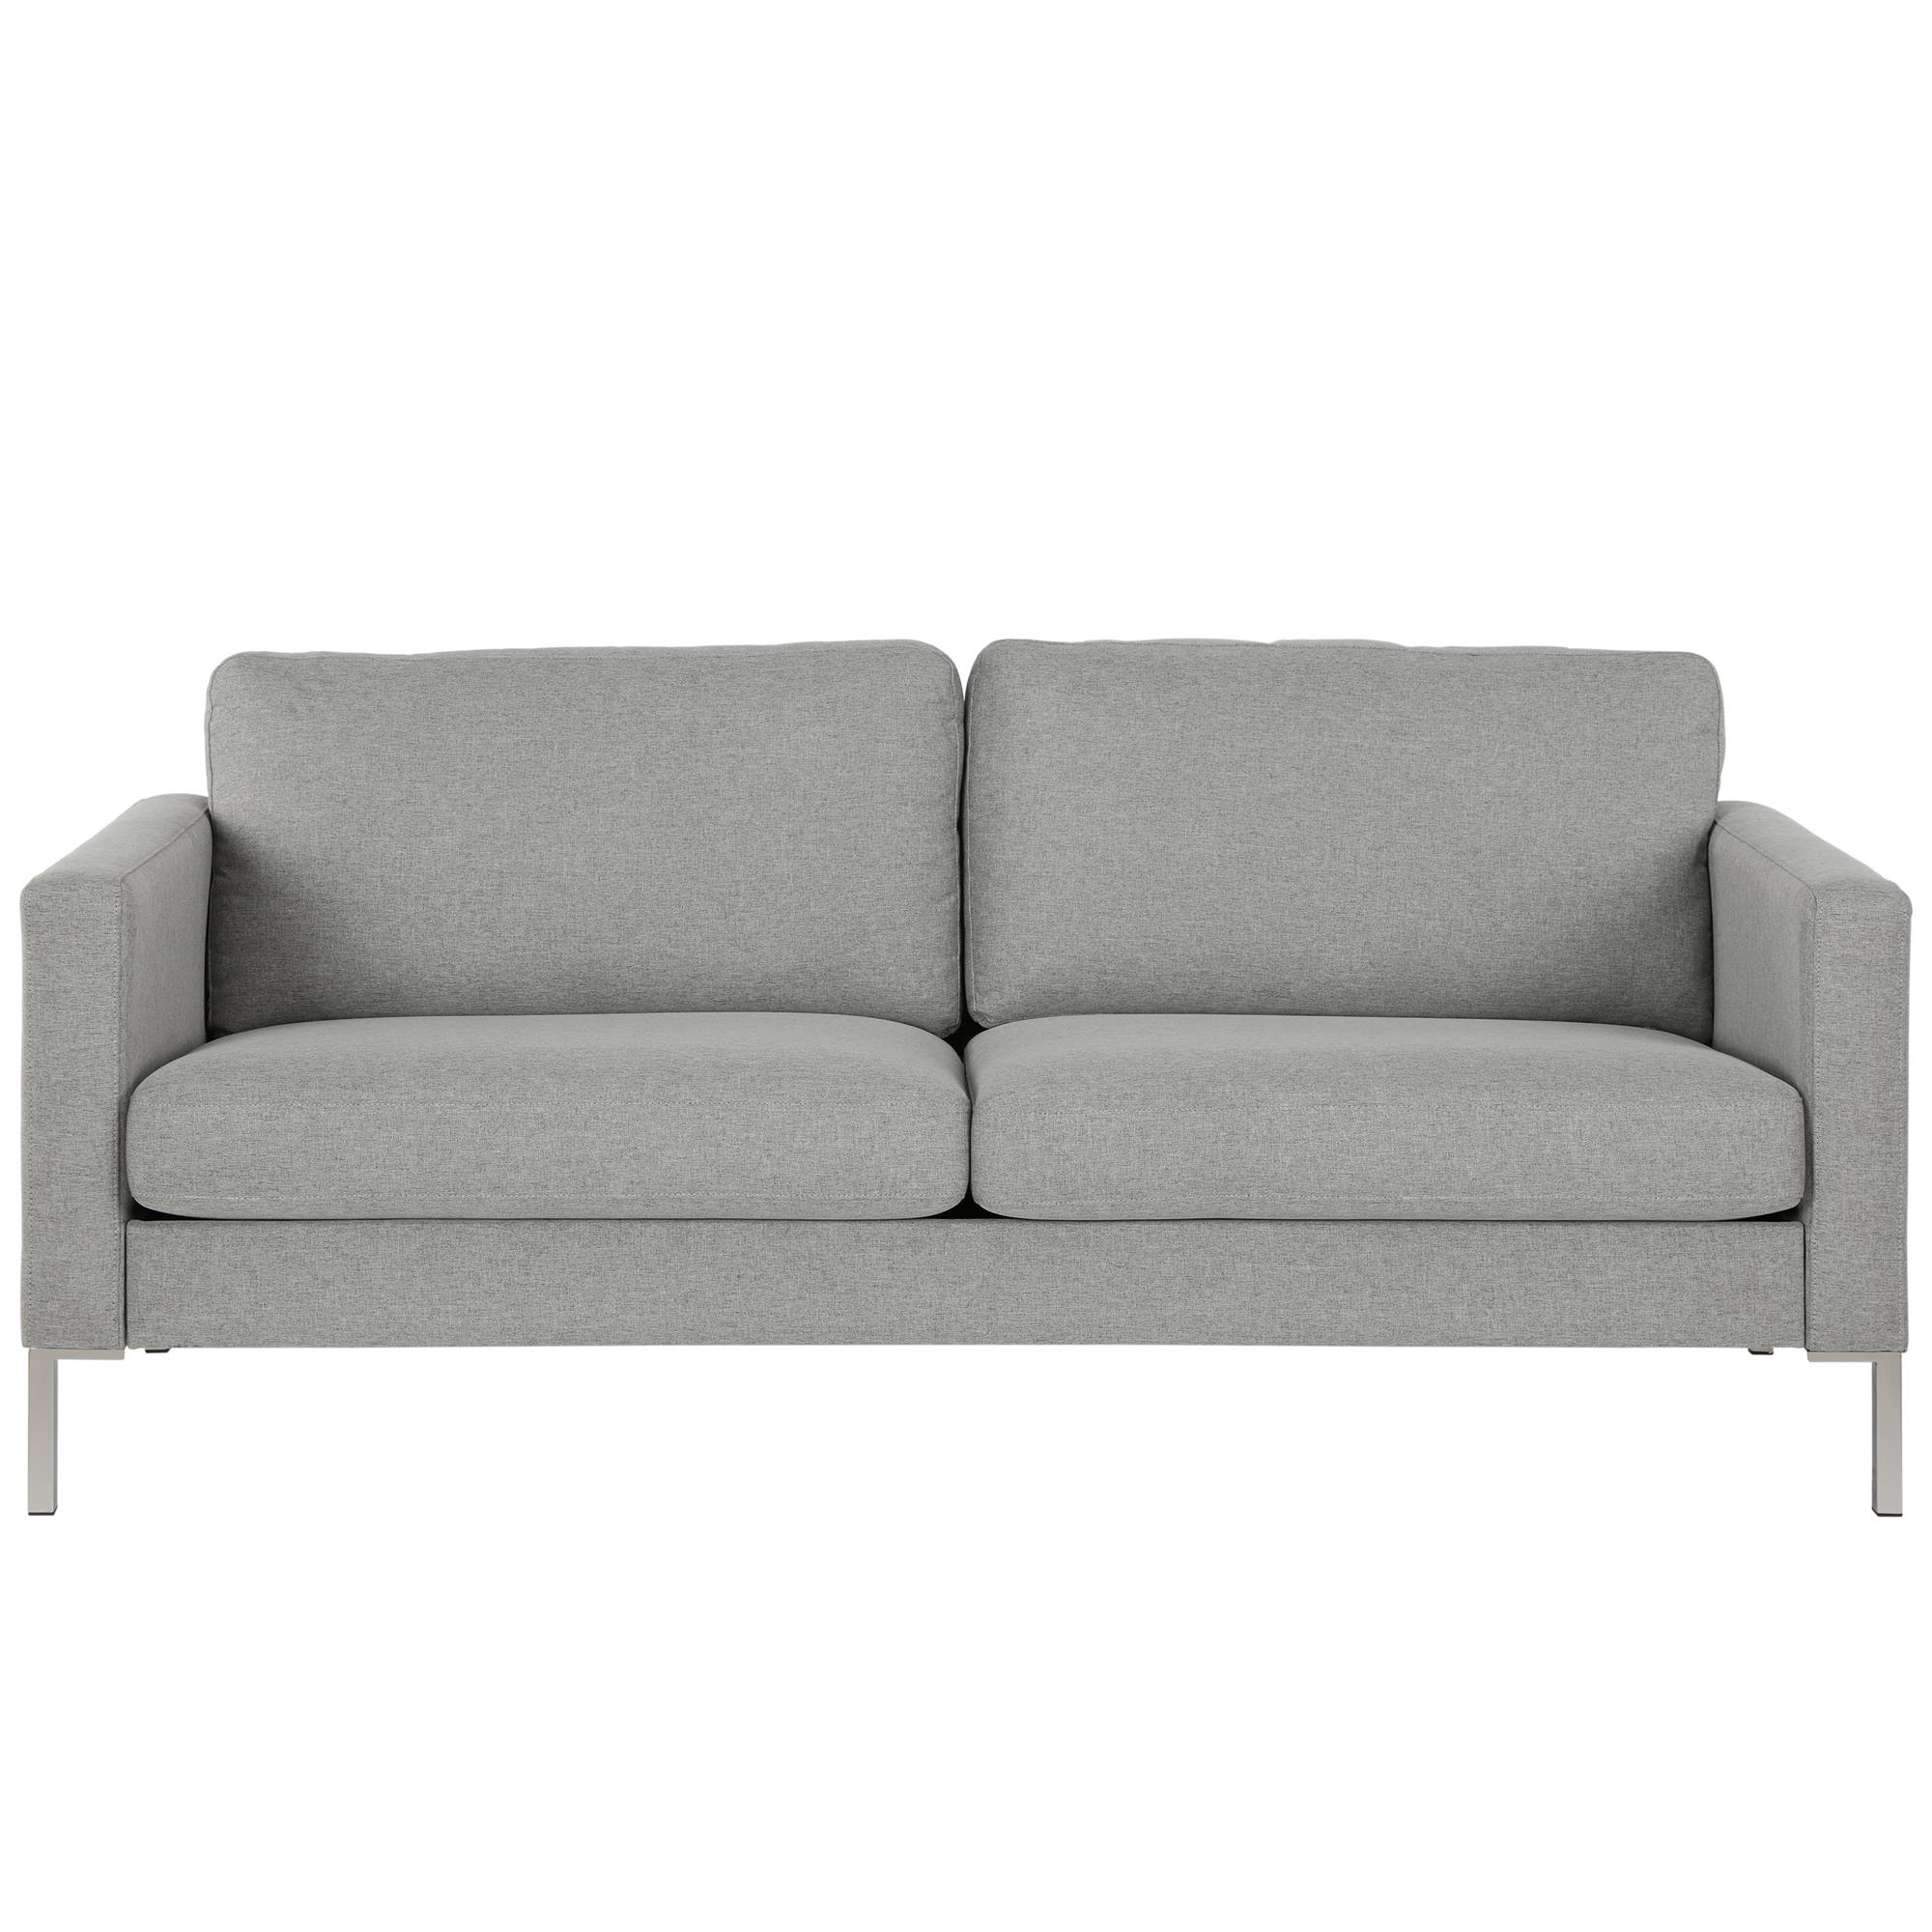 DHP Lexington Modern Sofa & Couch, Living Room Furniture, Gray Linen - image 3 of 14